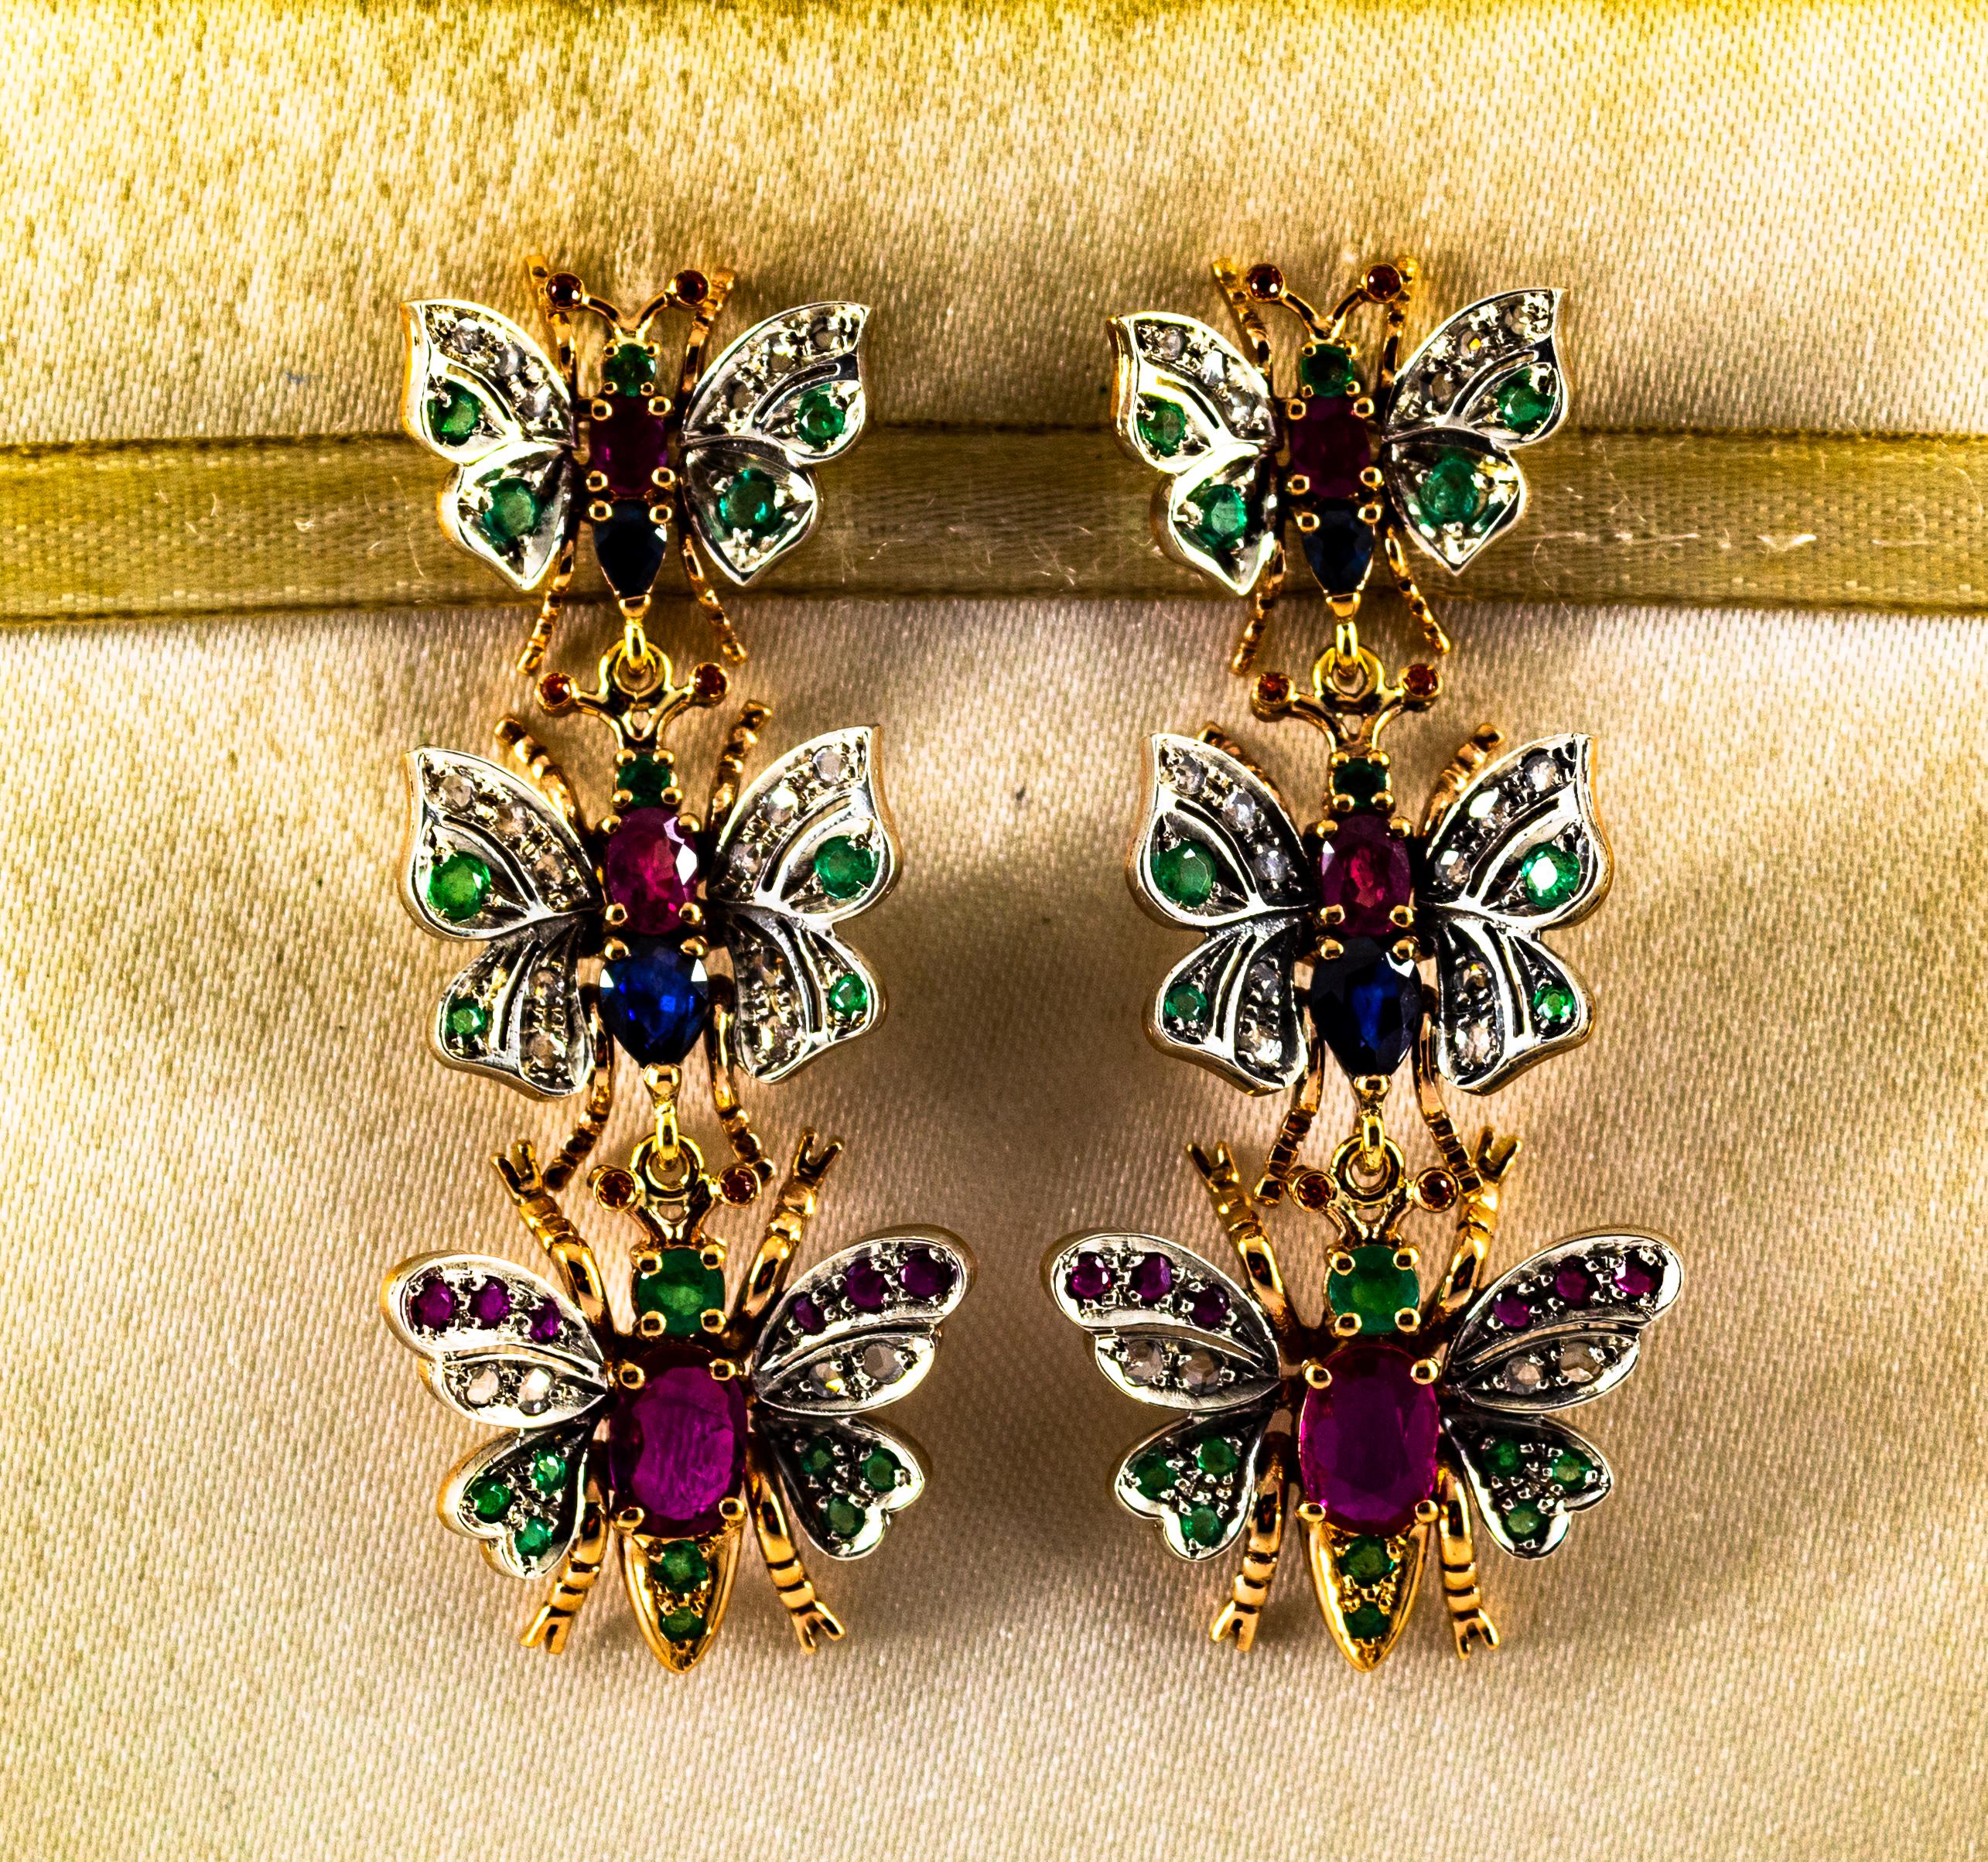 These Earrings are made of 9K Yellow Gold and Sterling Silver.
These Earrings have 0.35 Carats of White Rose Cut Diamonds.
These Earrings have 1.00 Carats of Emeralds.
These Earrings have 3.00 Carats of Rubies.
These Earrings have 1.20 Carats of